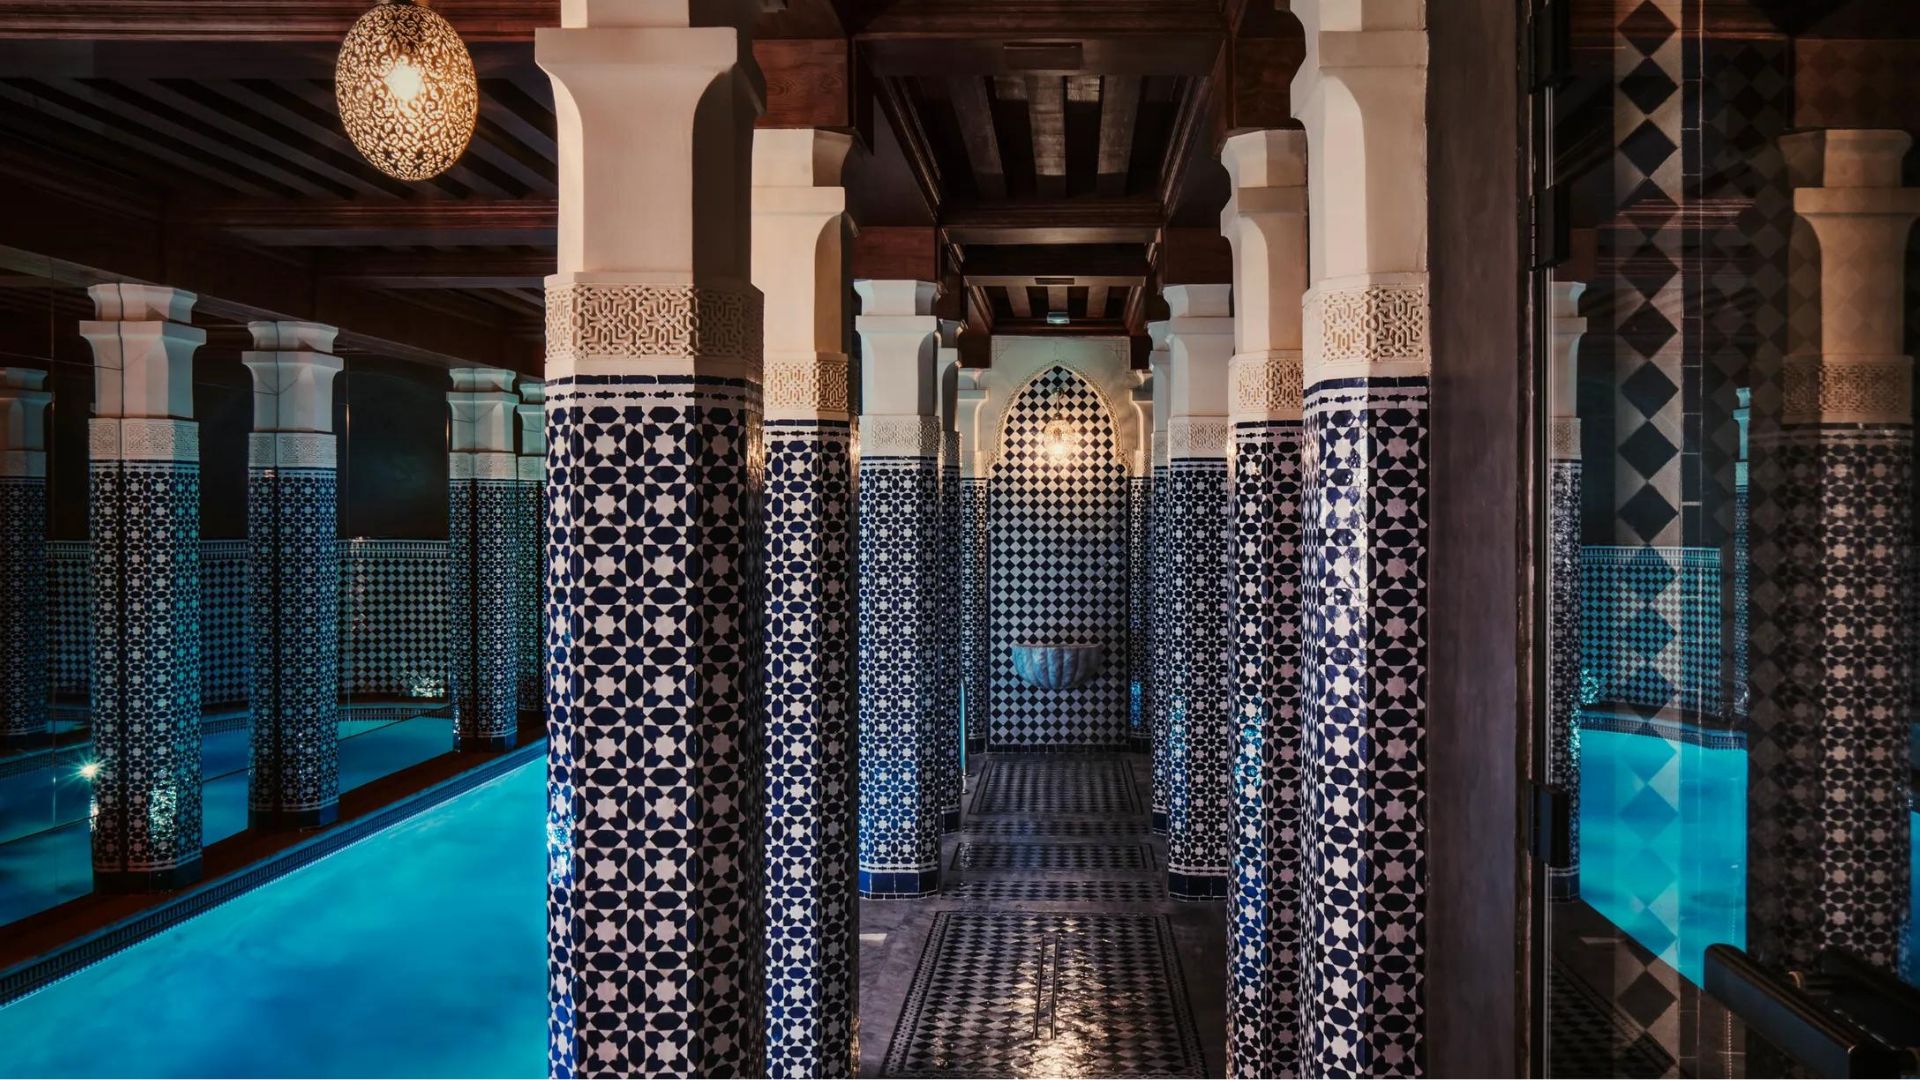 Rest and Relaxation: 8 Spas to Visit in Paris - France Today